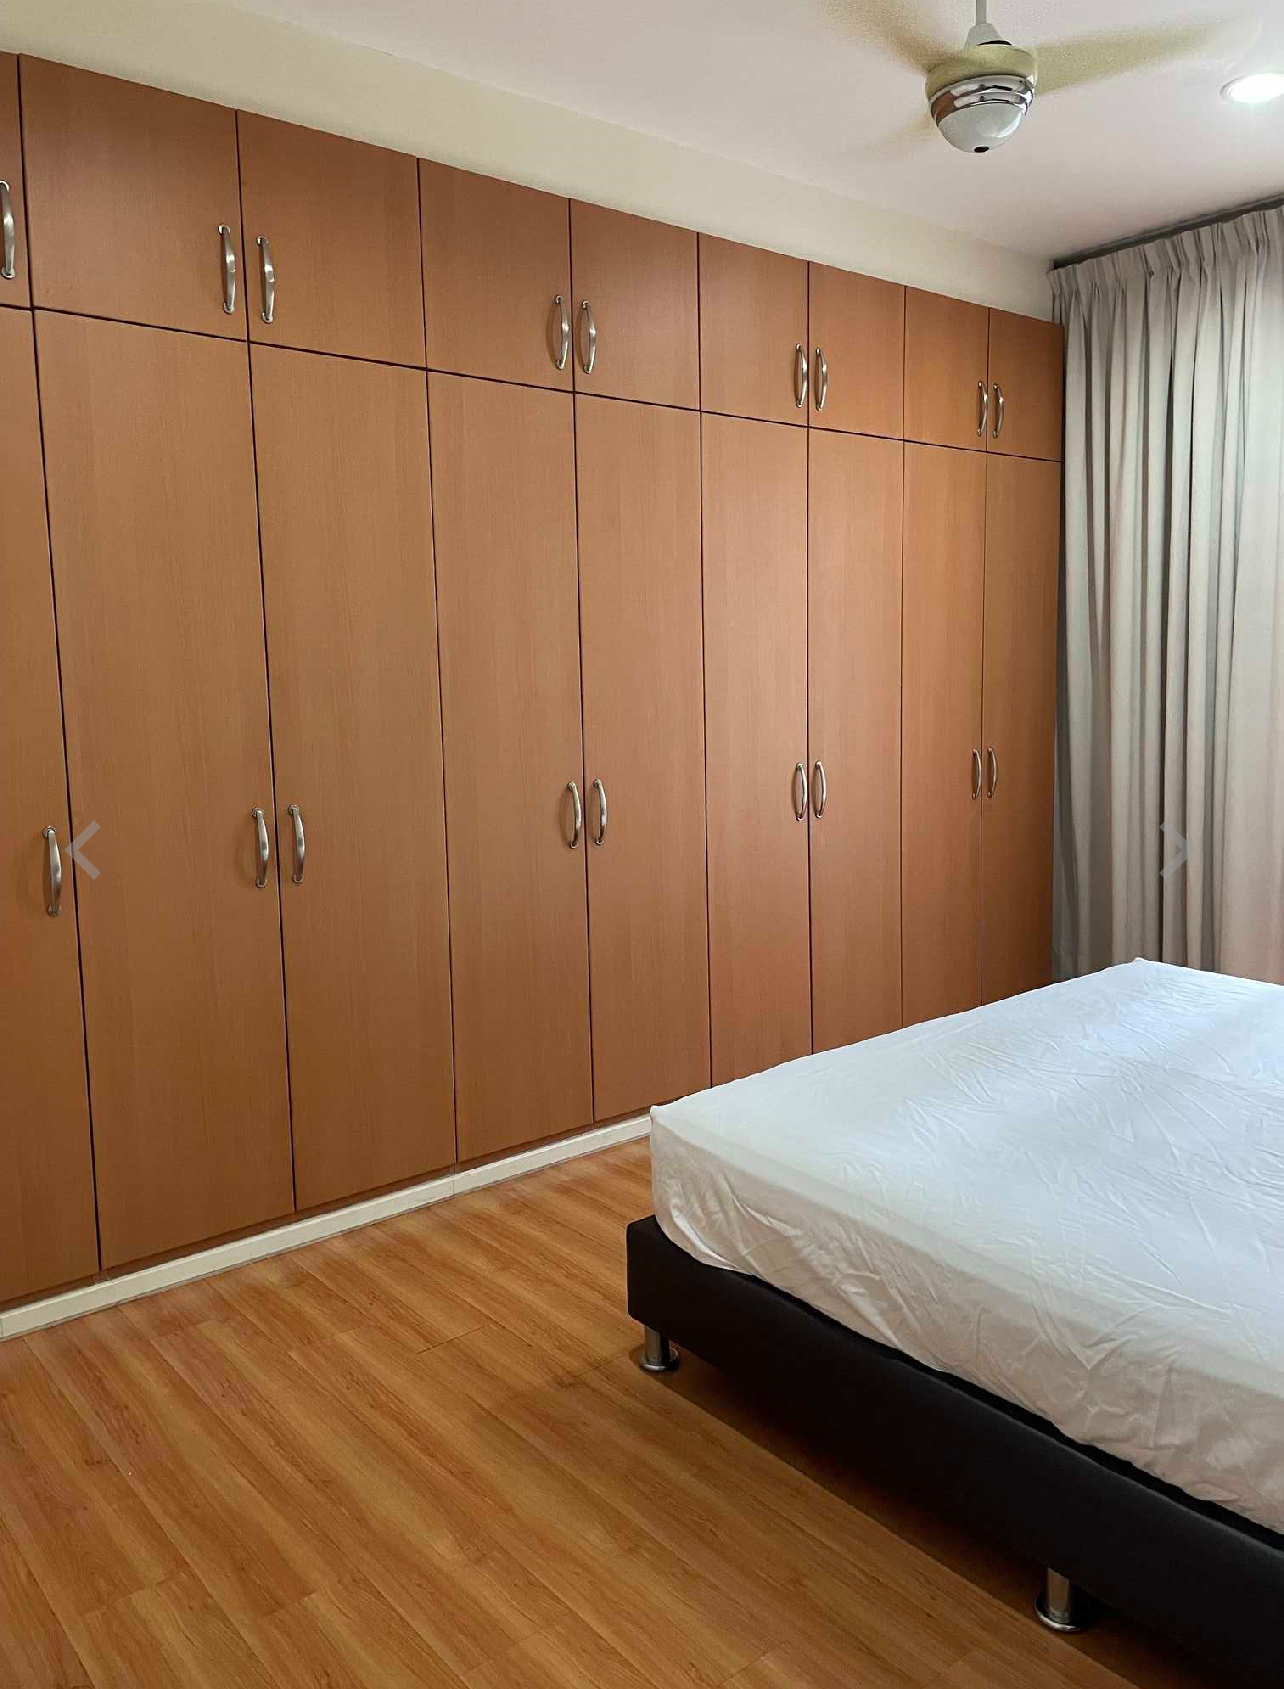 room for rent, studio, kuala lumpur city centre, Send the owner a message on WhatsApp/facebook if you want to RENT the unit(Mohammed Nhat)&Telegram(@muhammednhat101)